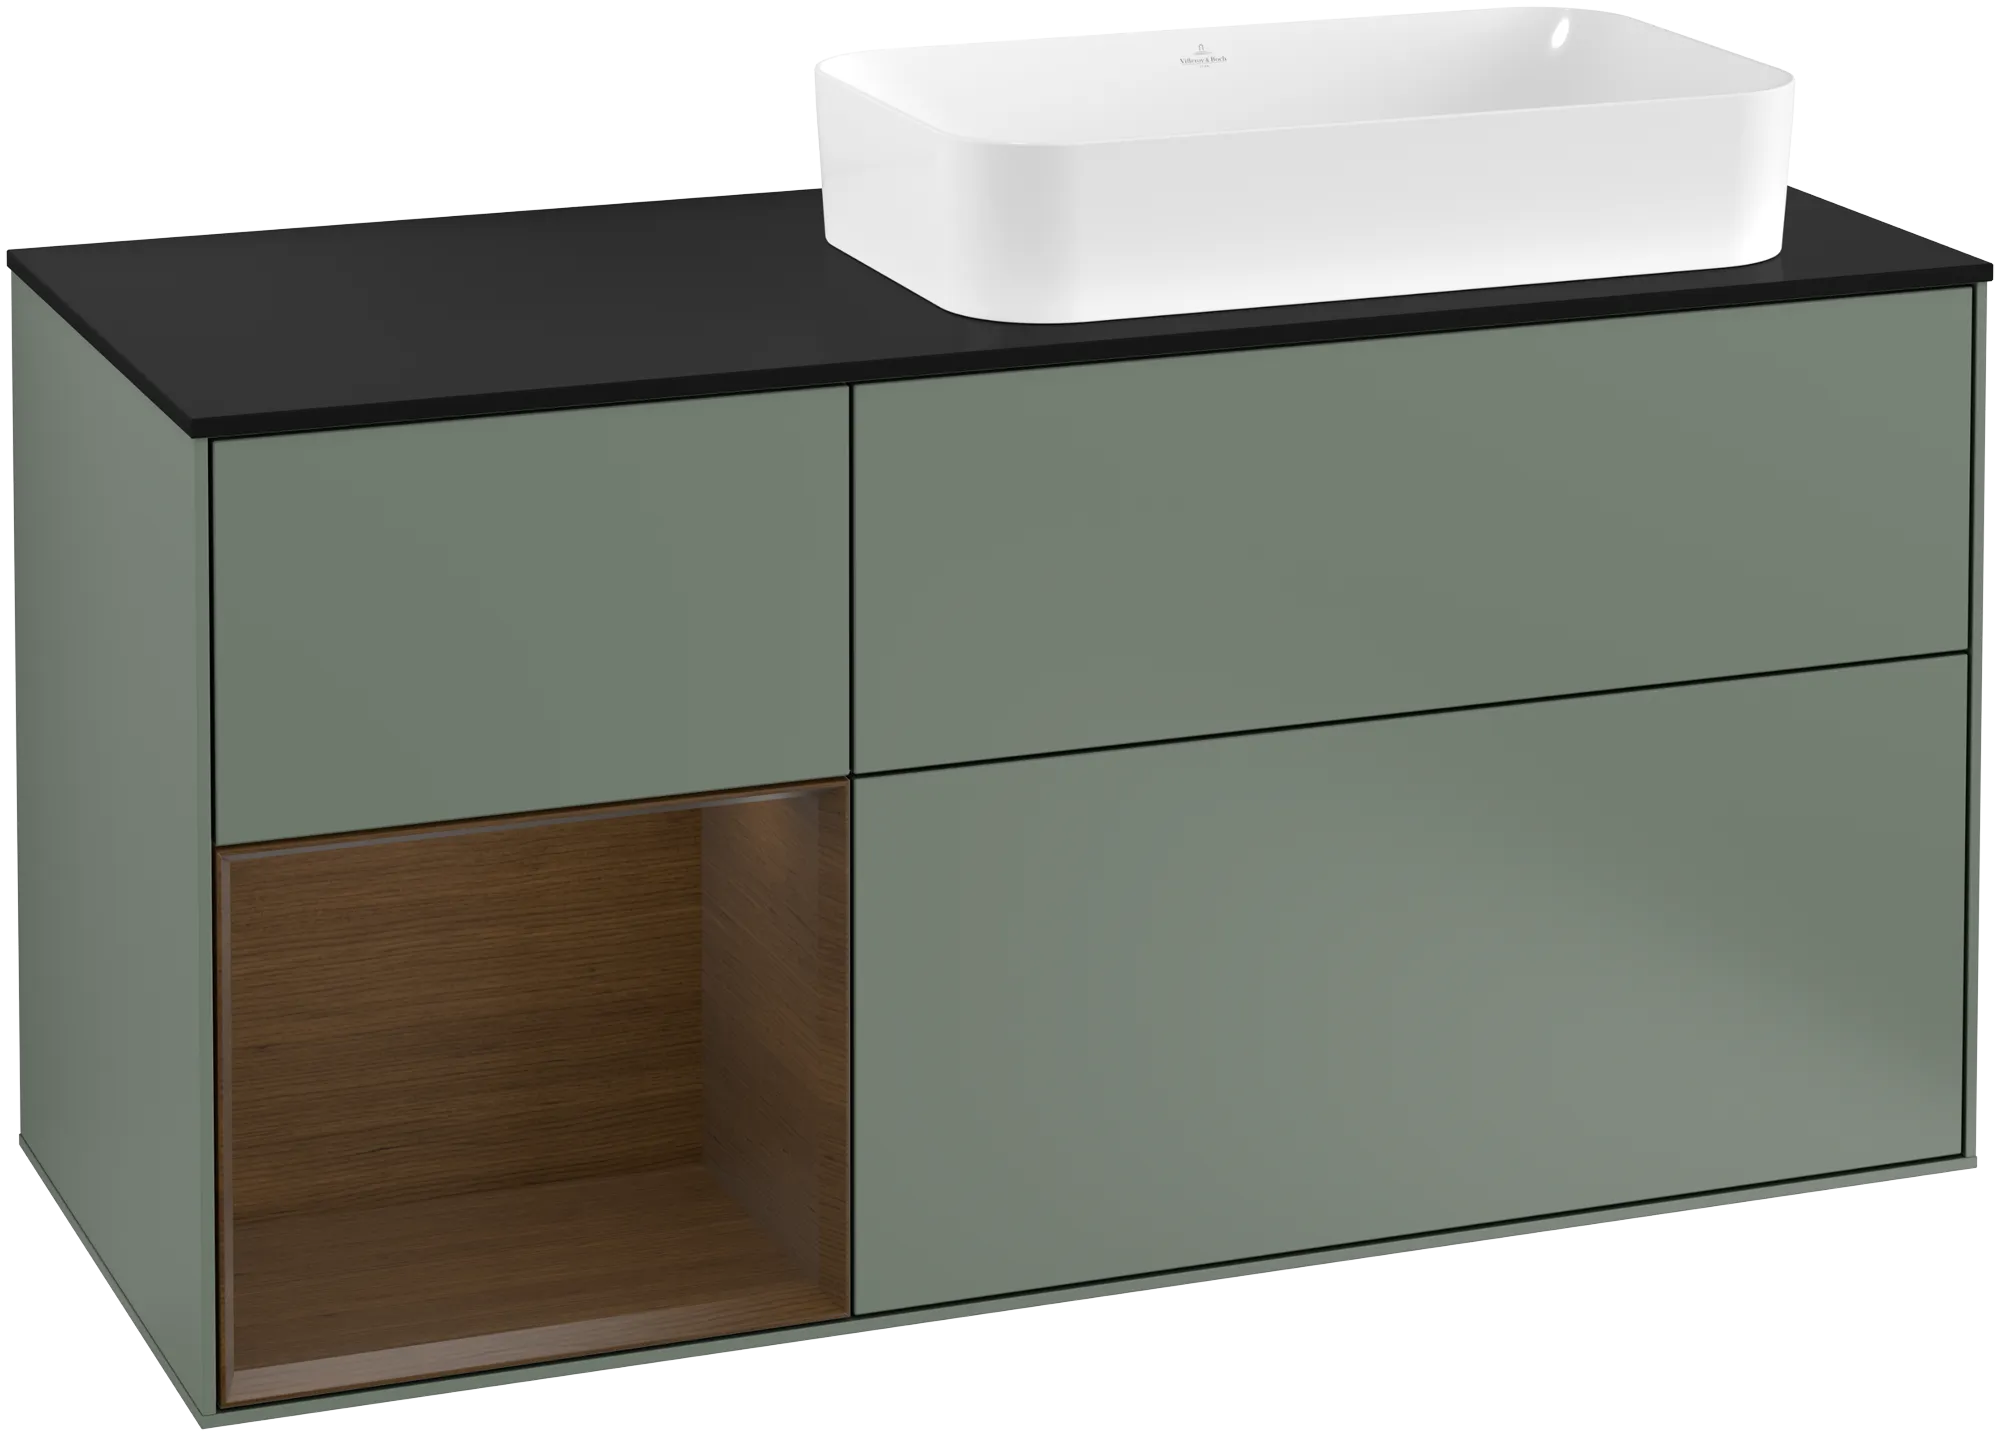 Picture of VILLEROY BOCH Finion Vanity unit, with lighting, 3 pull-out compartments, 1200 x 603 x 501 mm, Olive Matt Lacquer / Walnut Veneer / Glass Black Matt #G272GNGM